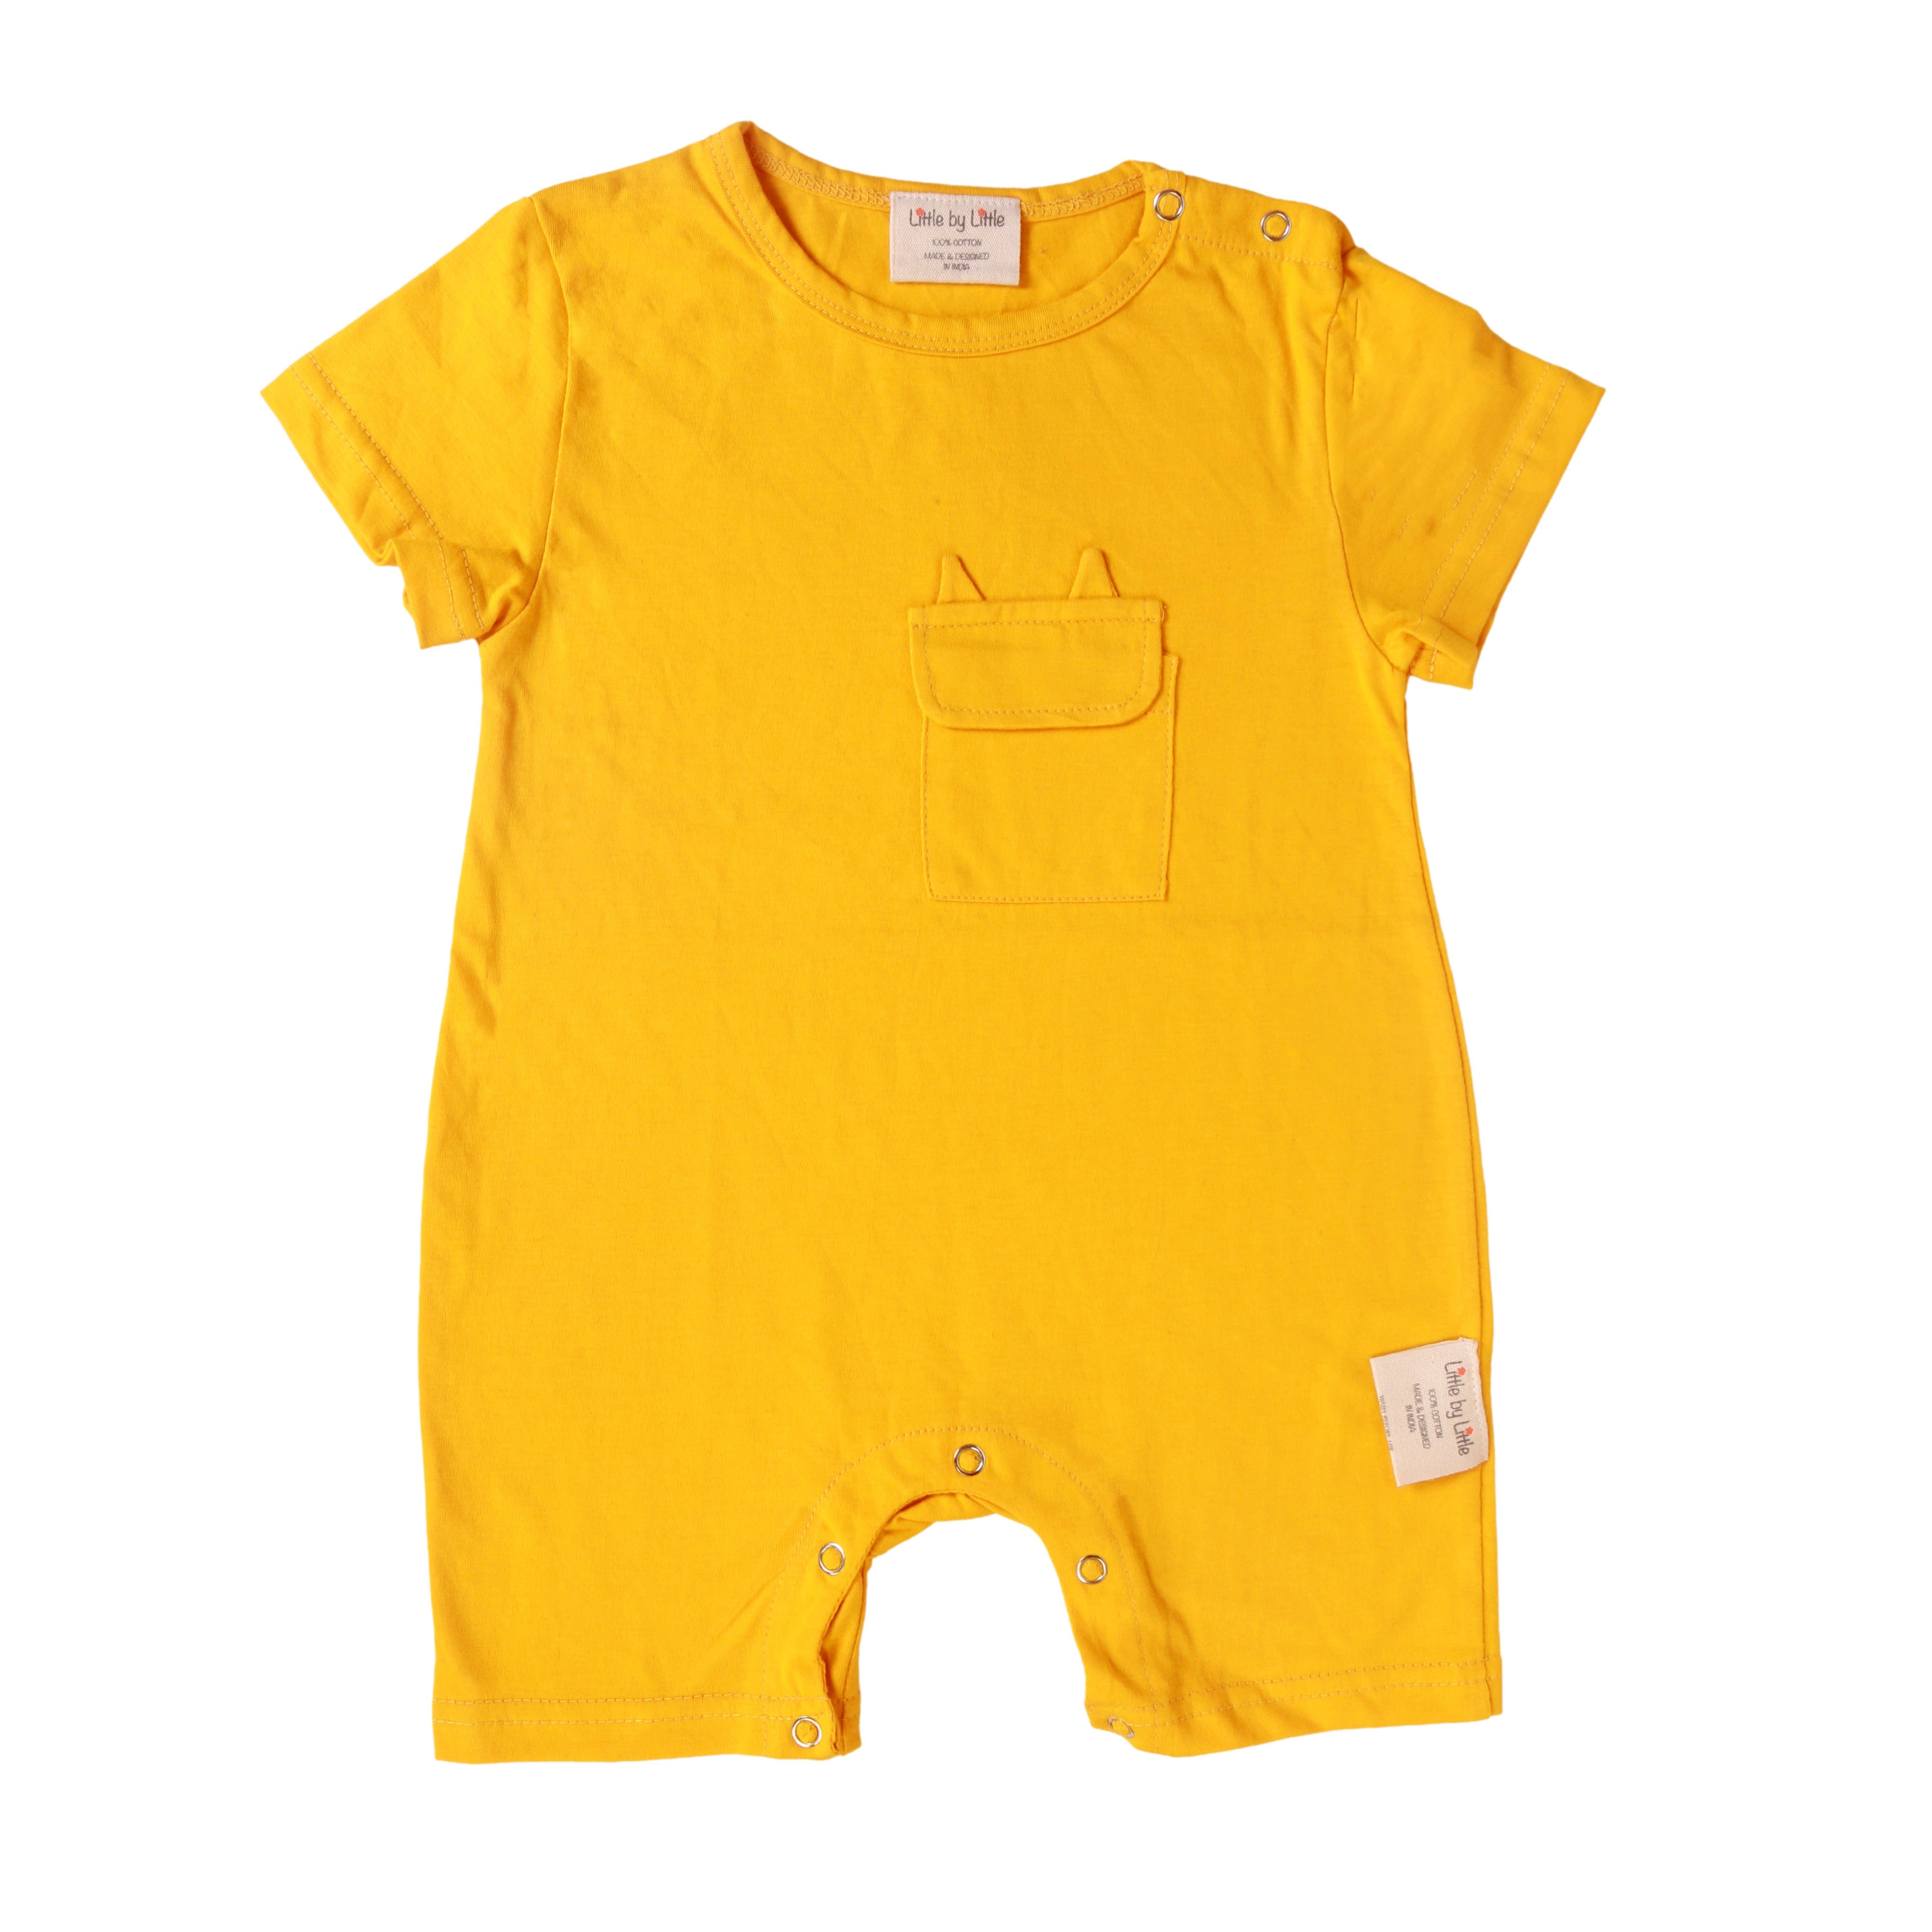 Little By Little 100% Anti Viral, Cotton, Reusable, Anti bacterial & Water Repellent Baby Romper - Yellow